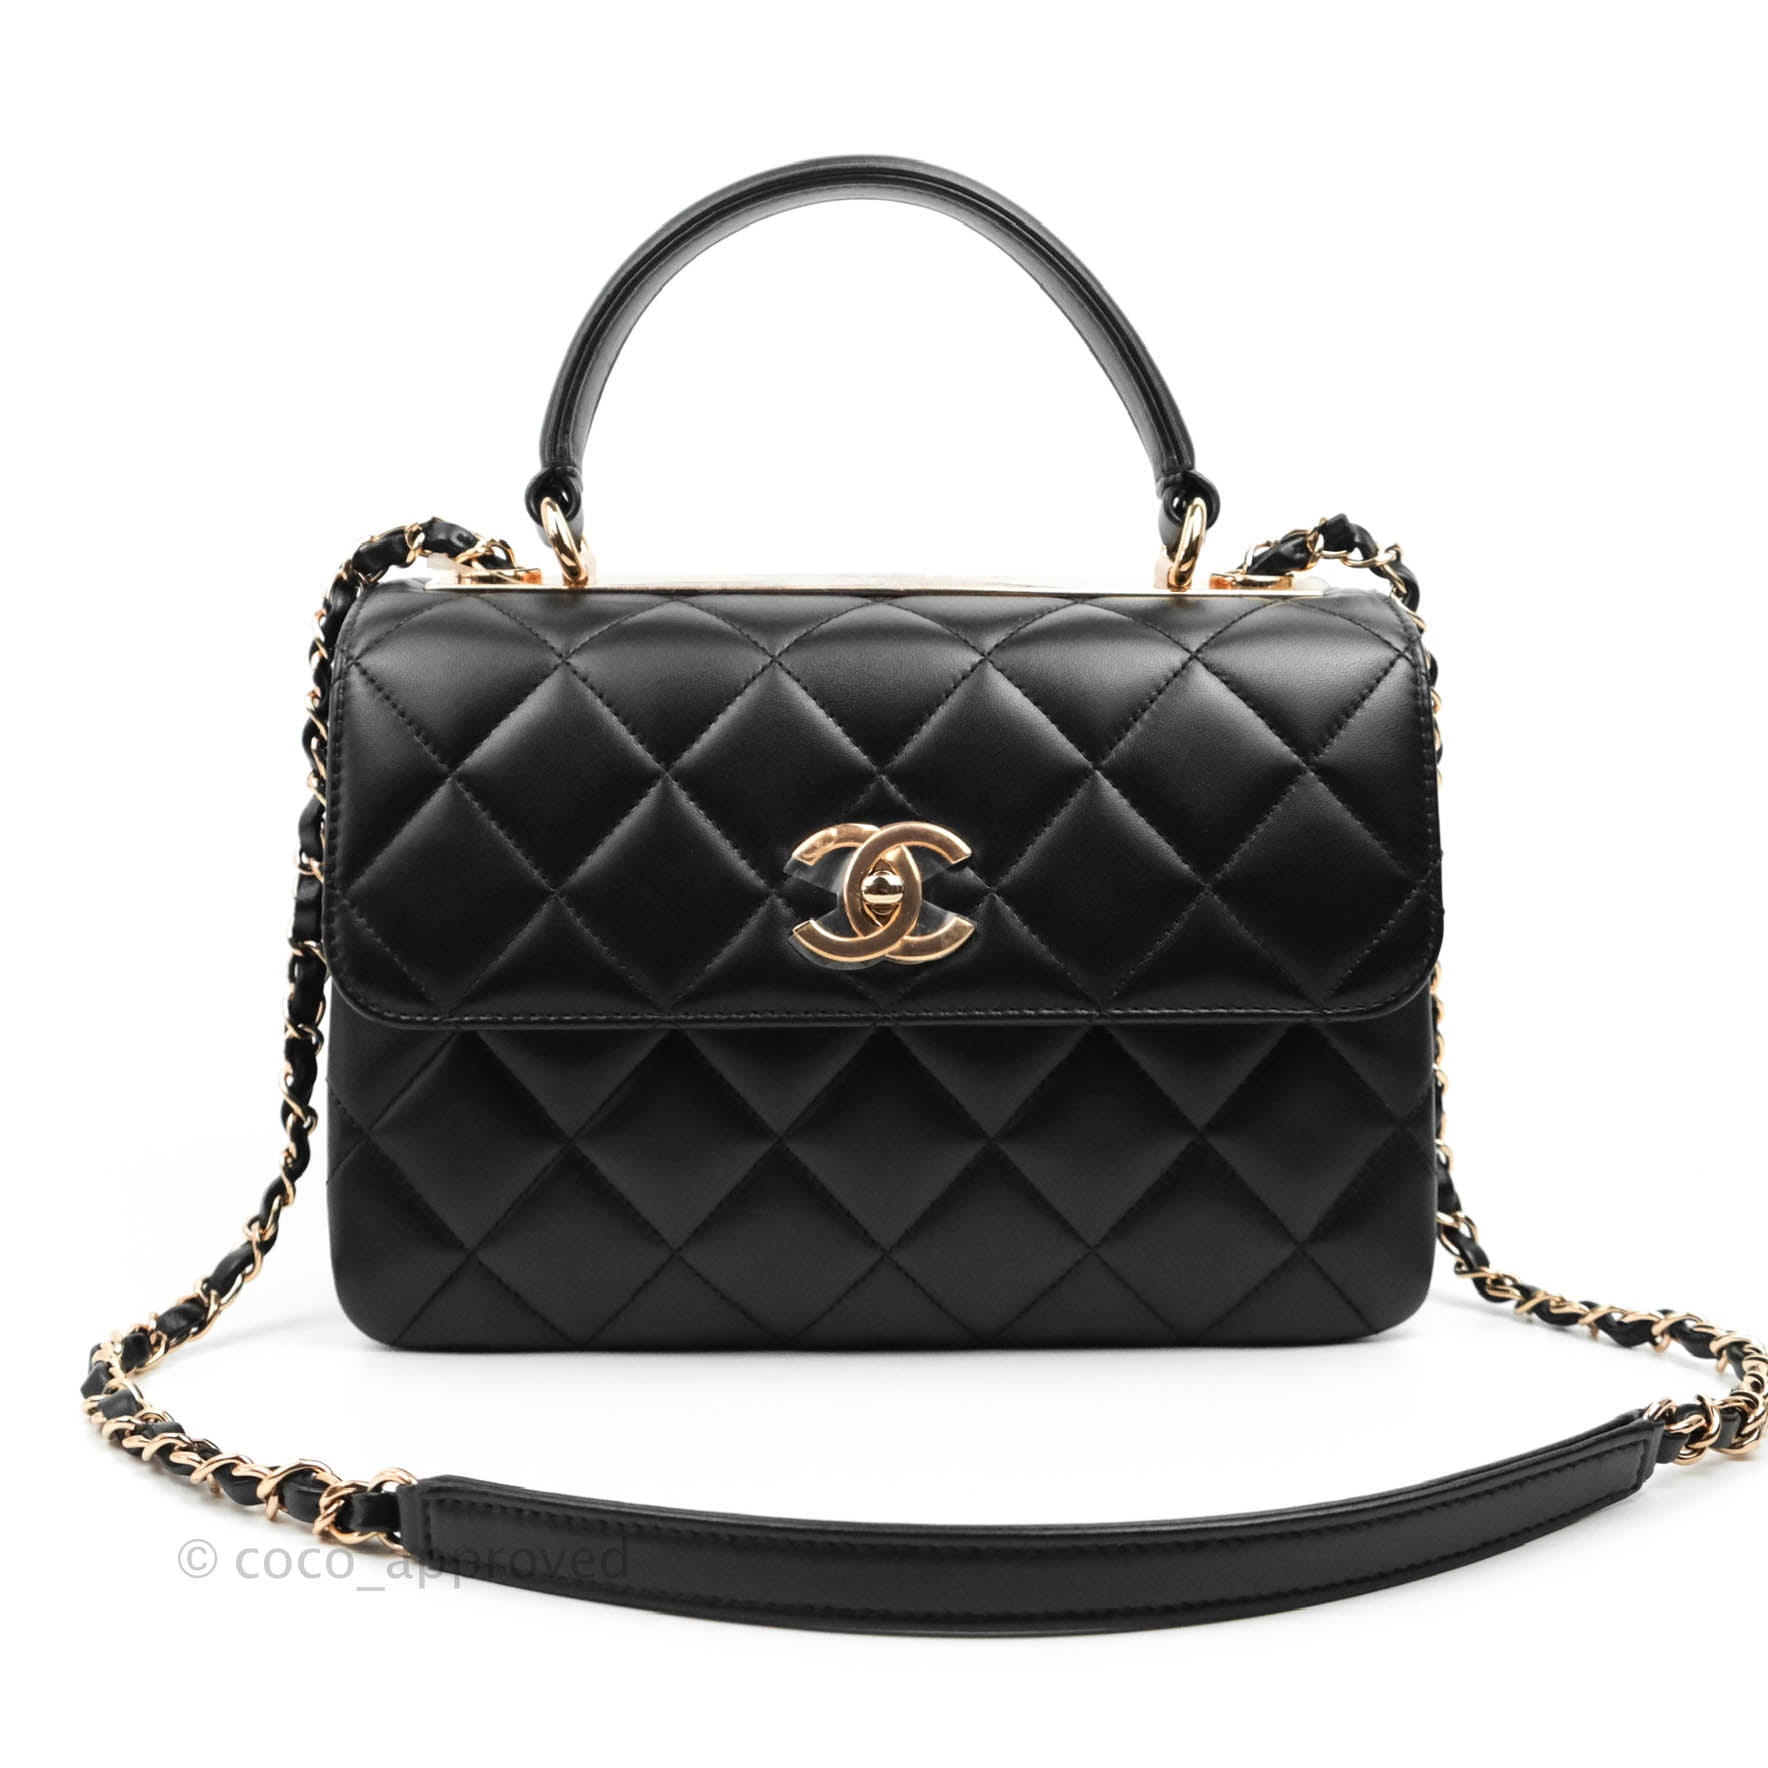 Chanel Trendy CC Small Black Lambskin Rose Gold Hardware – Coco Approved  Studio